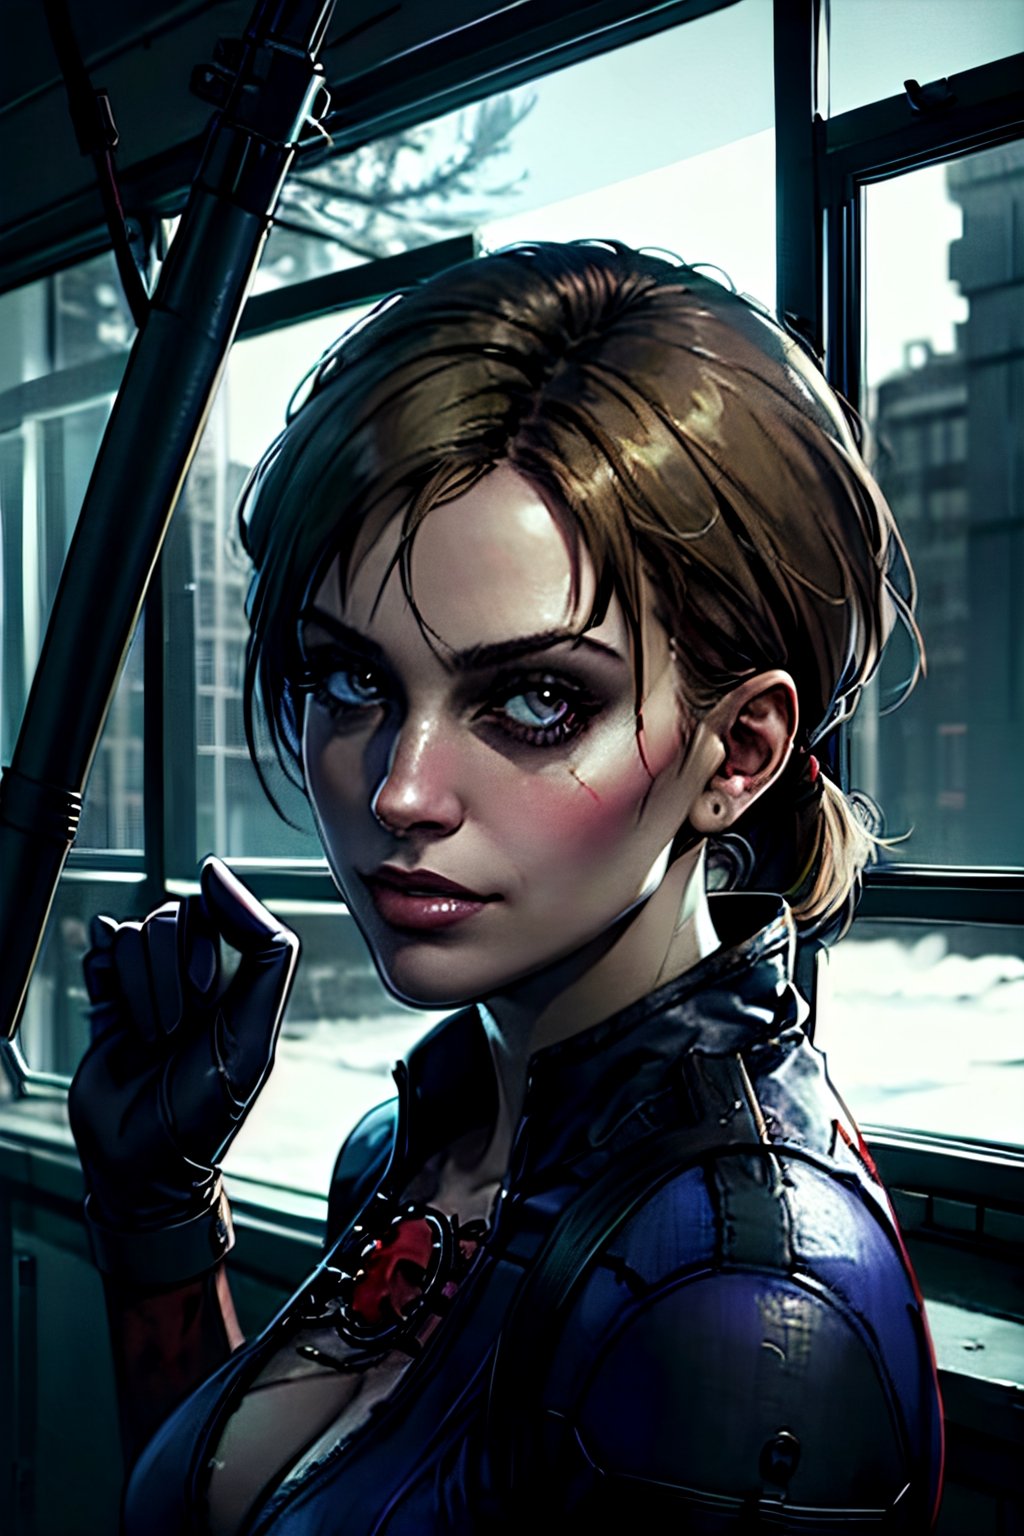 jill valentine (resident evil 5), facial portrait, sexy stare, smirked, inside lab, umbrella signs, zombies in the window